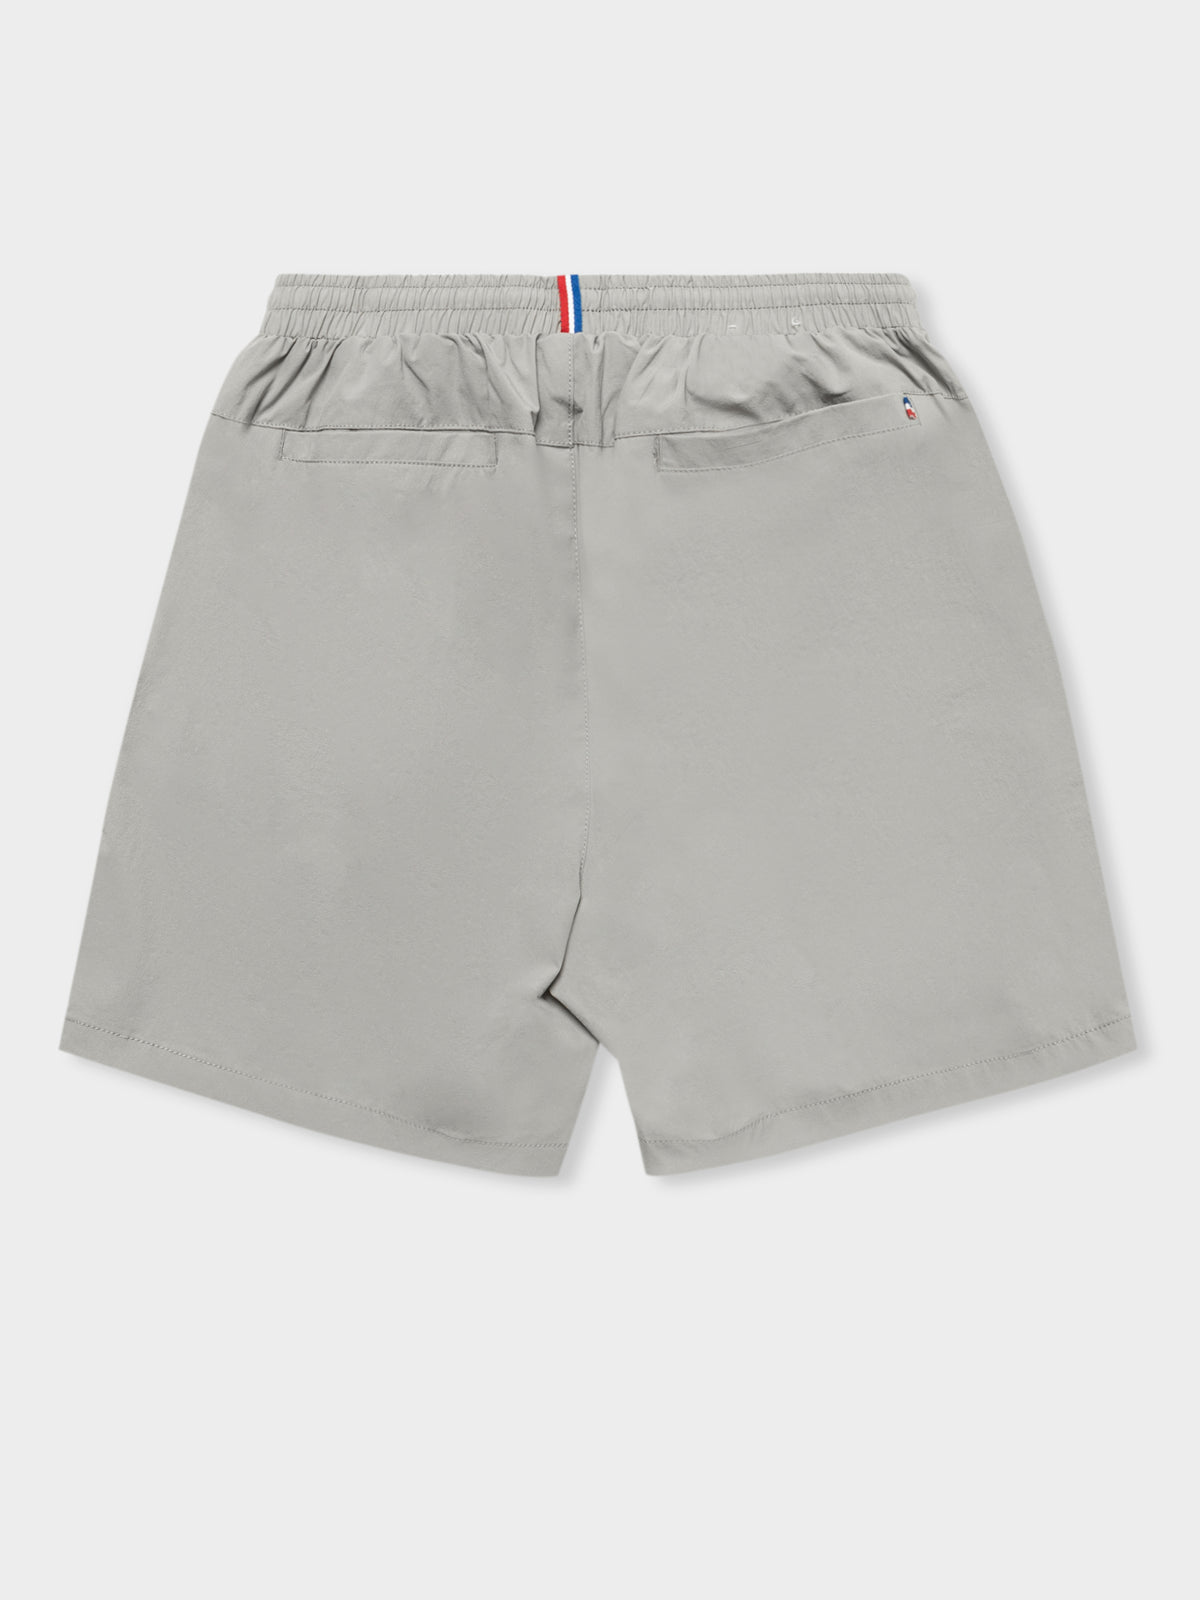 Concurrent Shorts in Grey